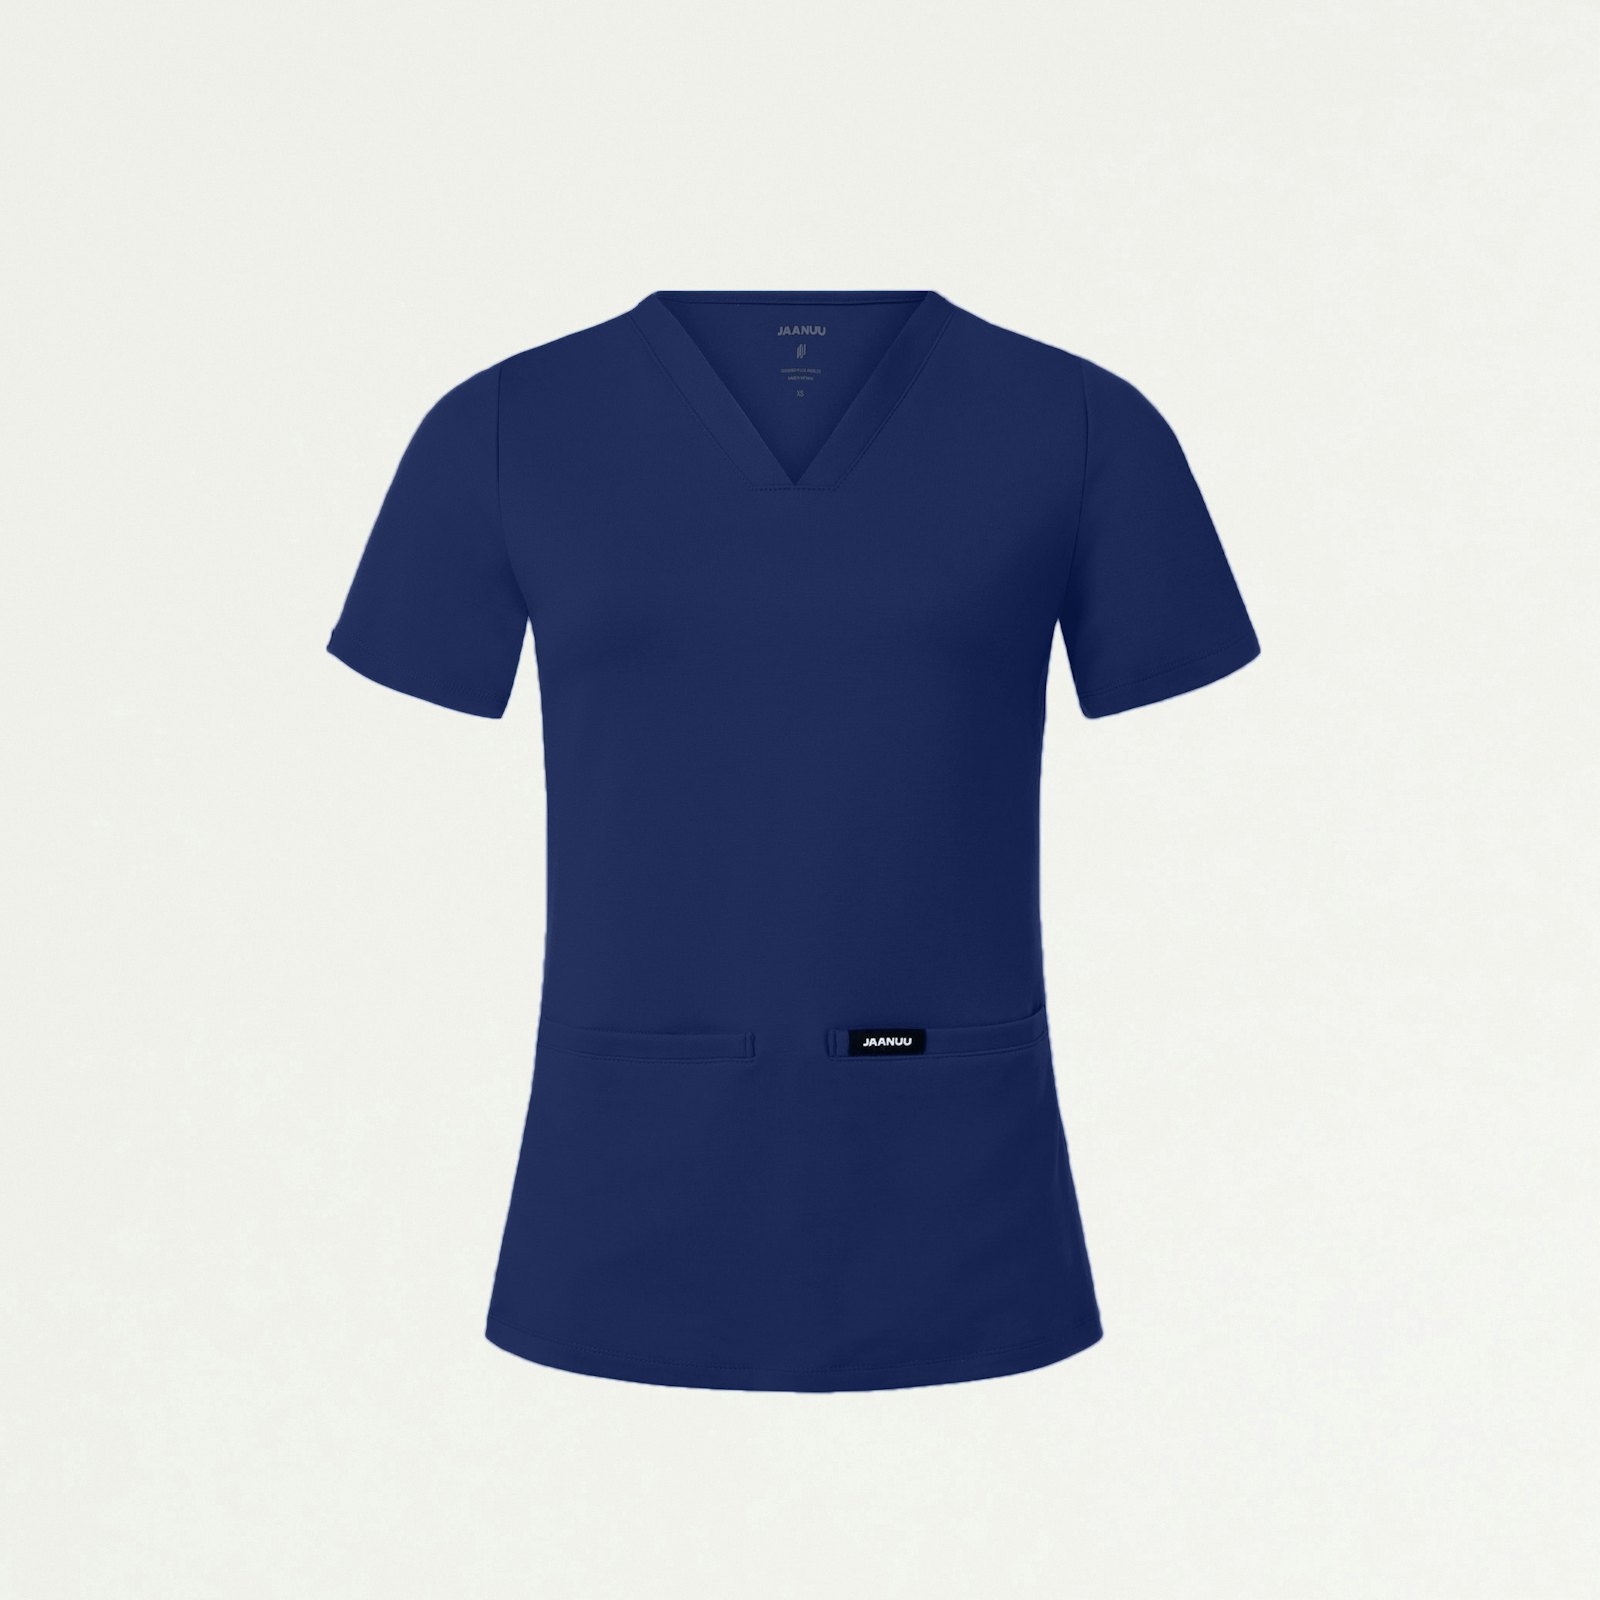 Authentic Top Navy Blue – yuly360